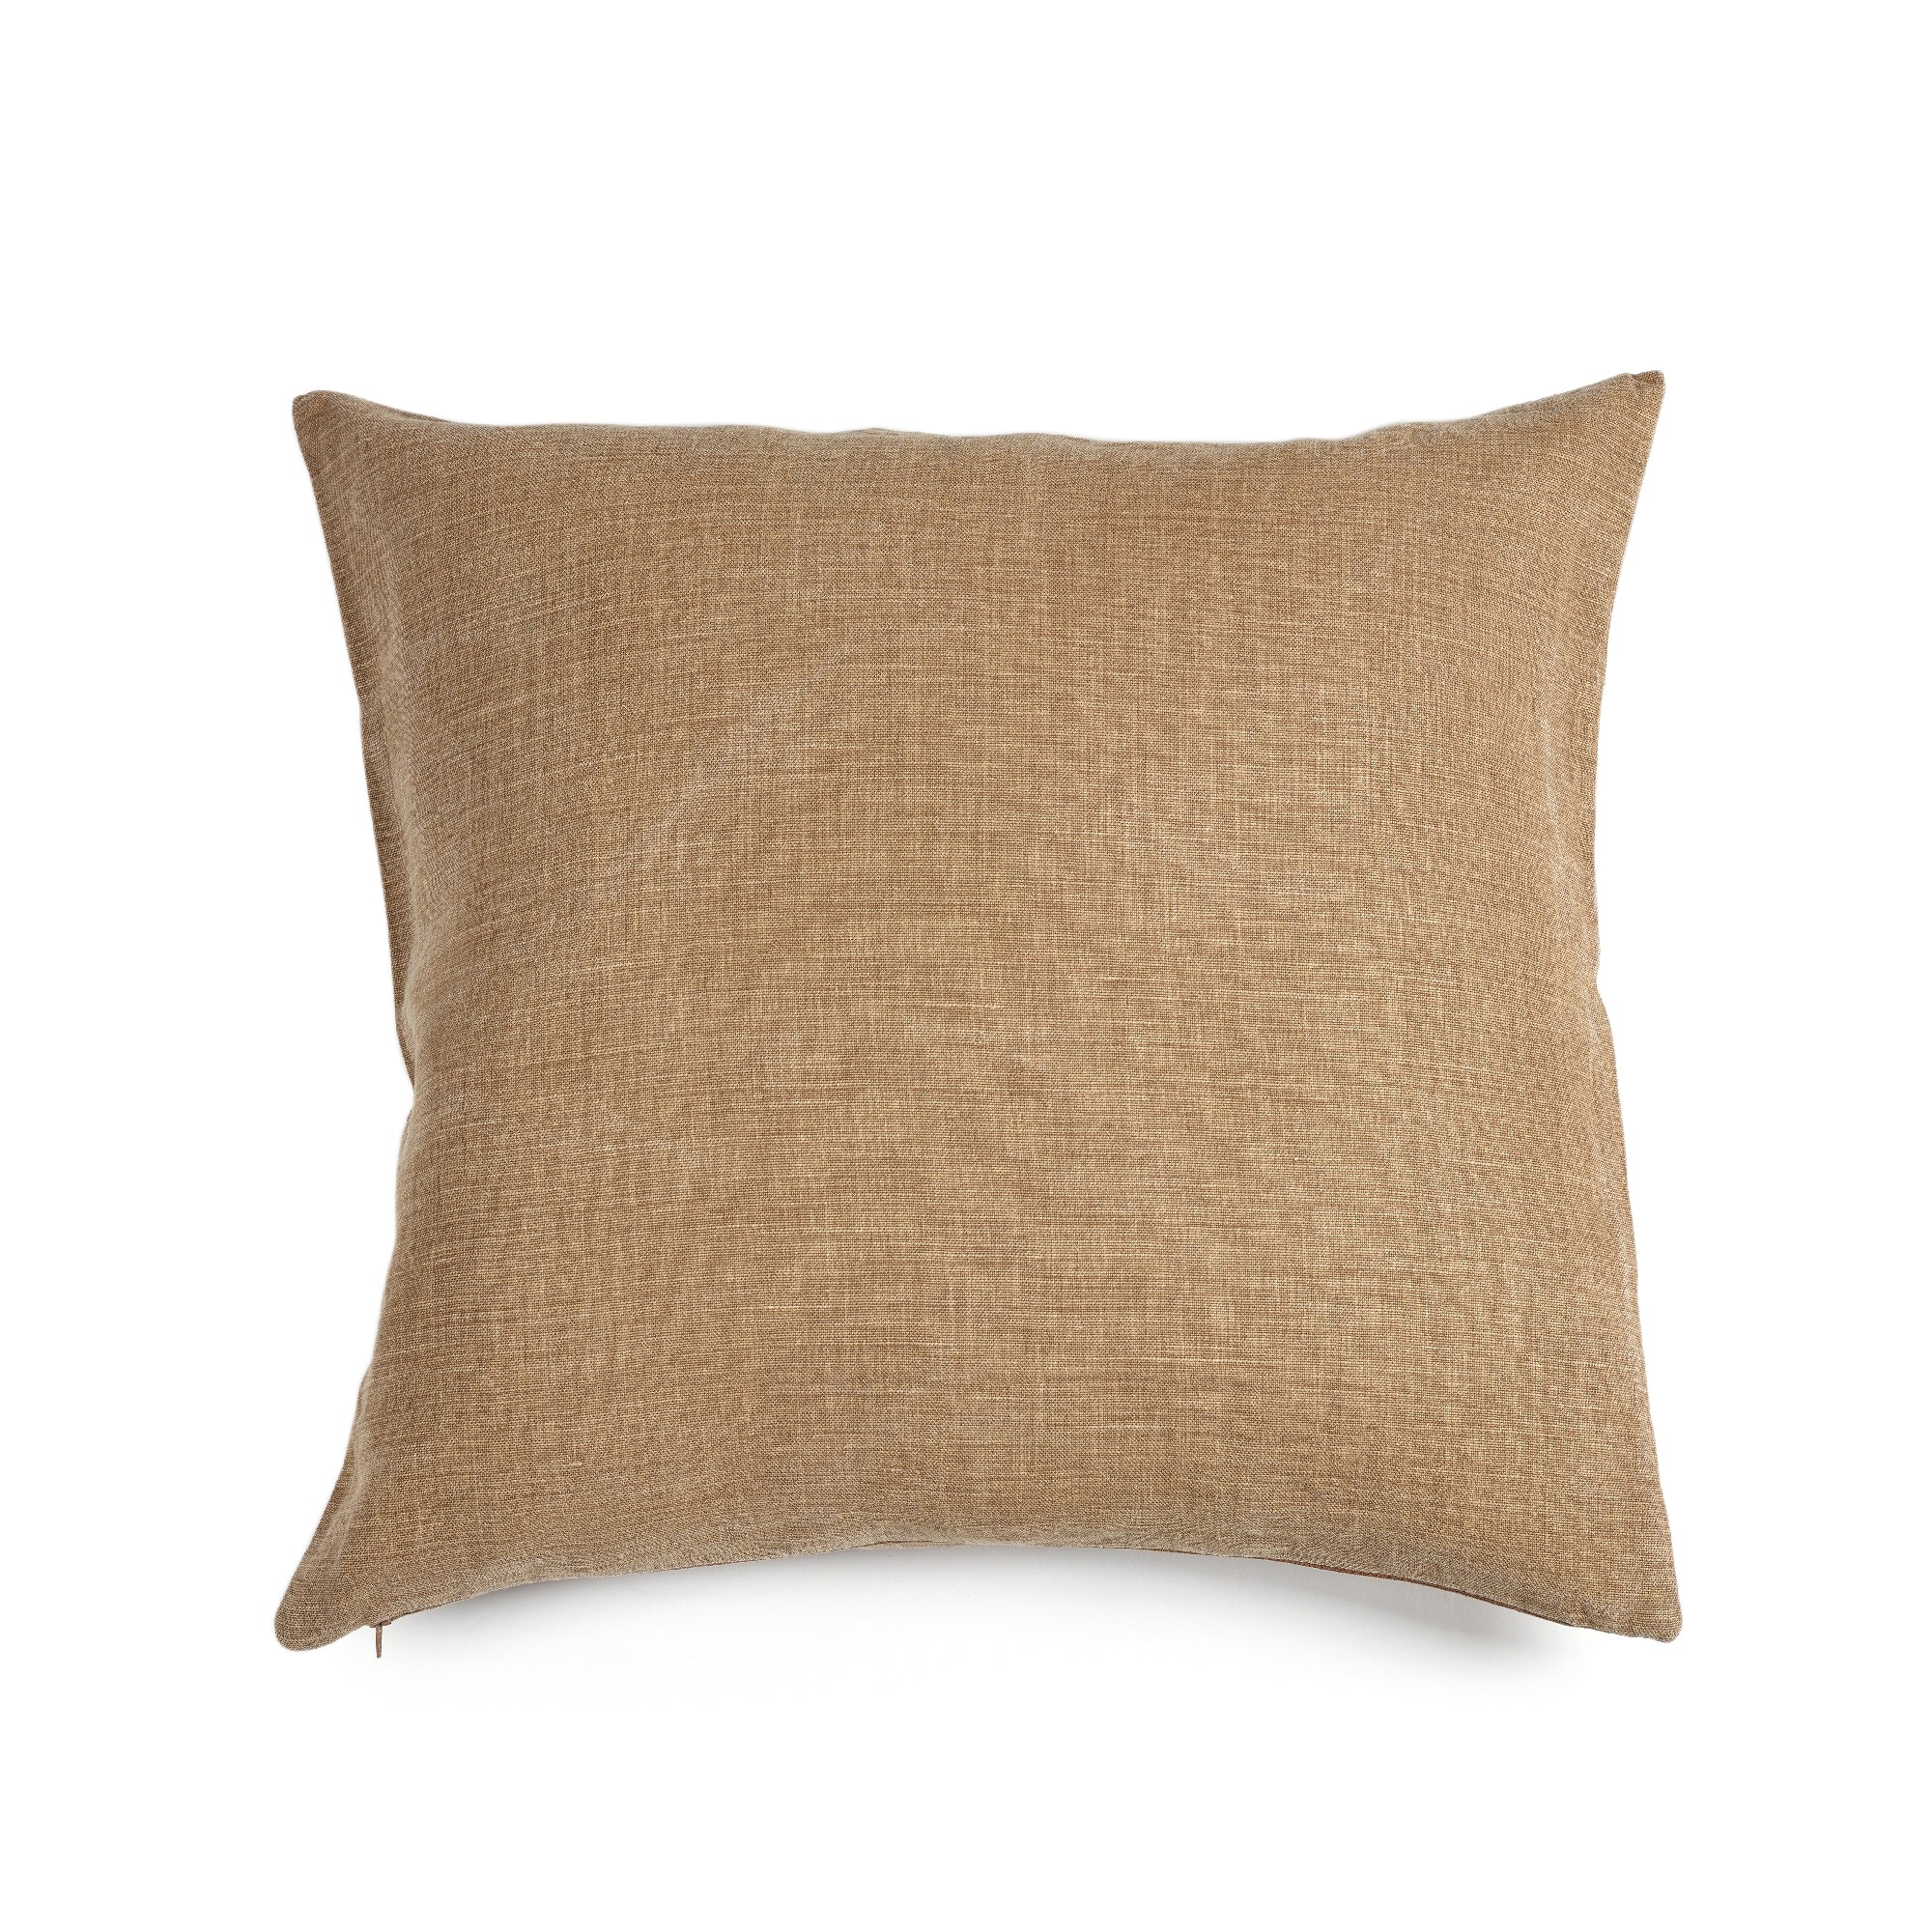 ré pillow cover linen pillow cover case and sham by libeco on adorn.house